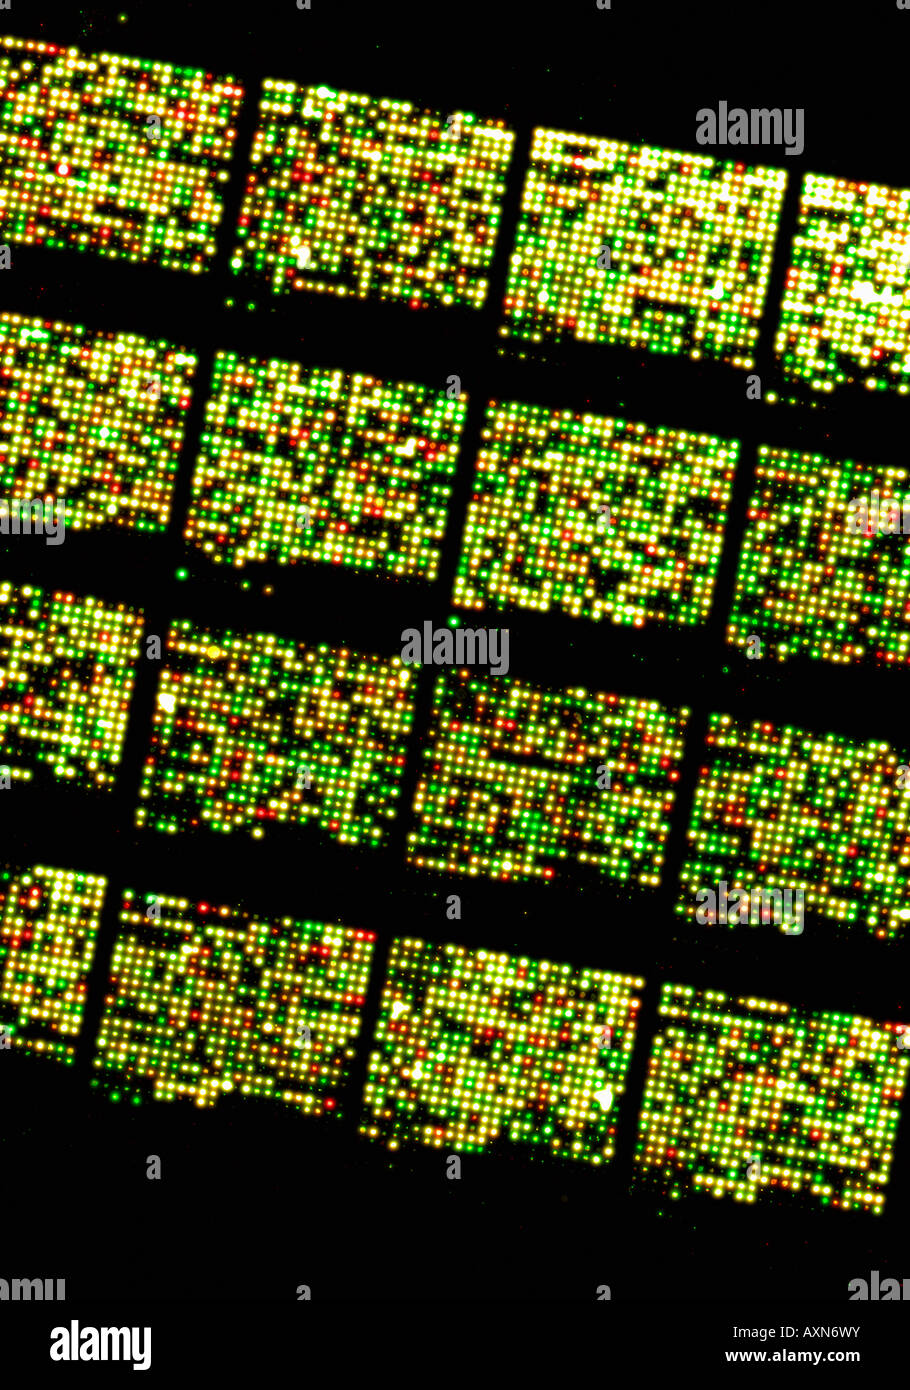 Micro Array DNA Chip, human genome structure Stock Photo